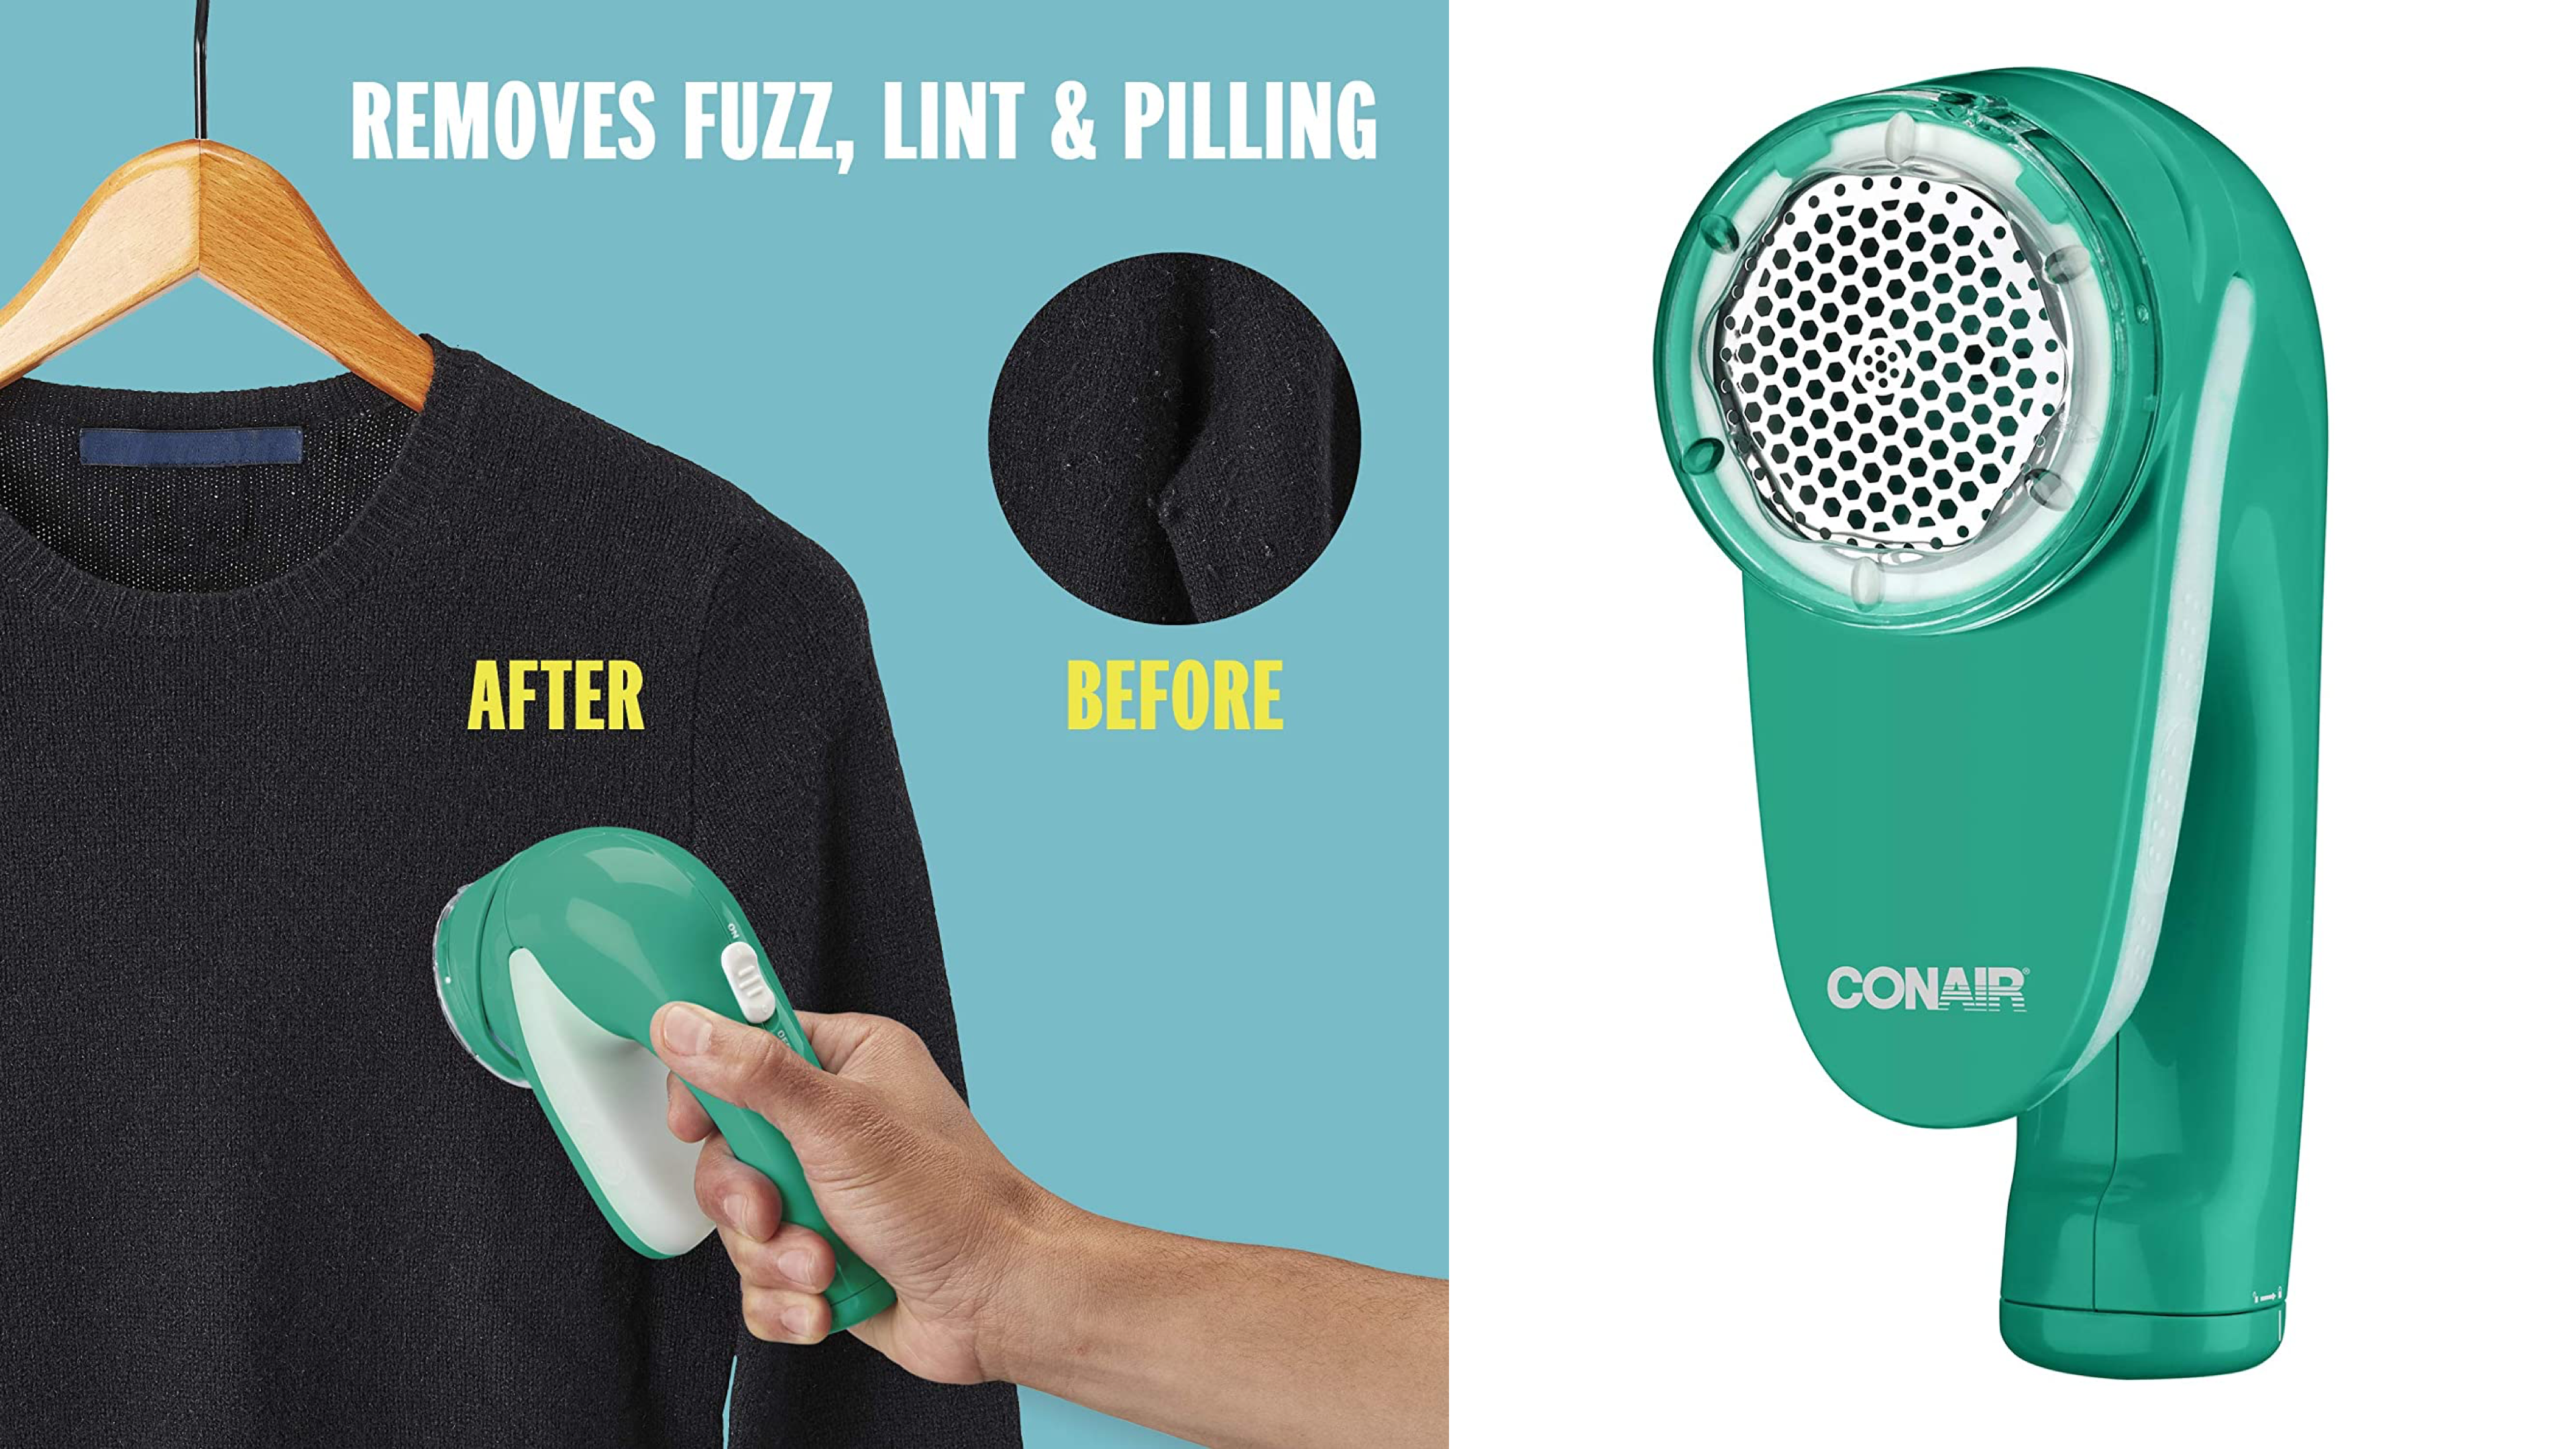 36 Products That Solve Deeply Specific Problems